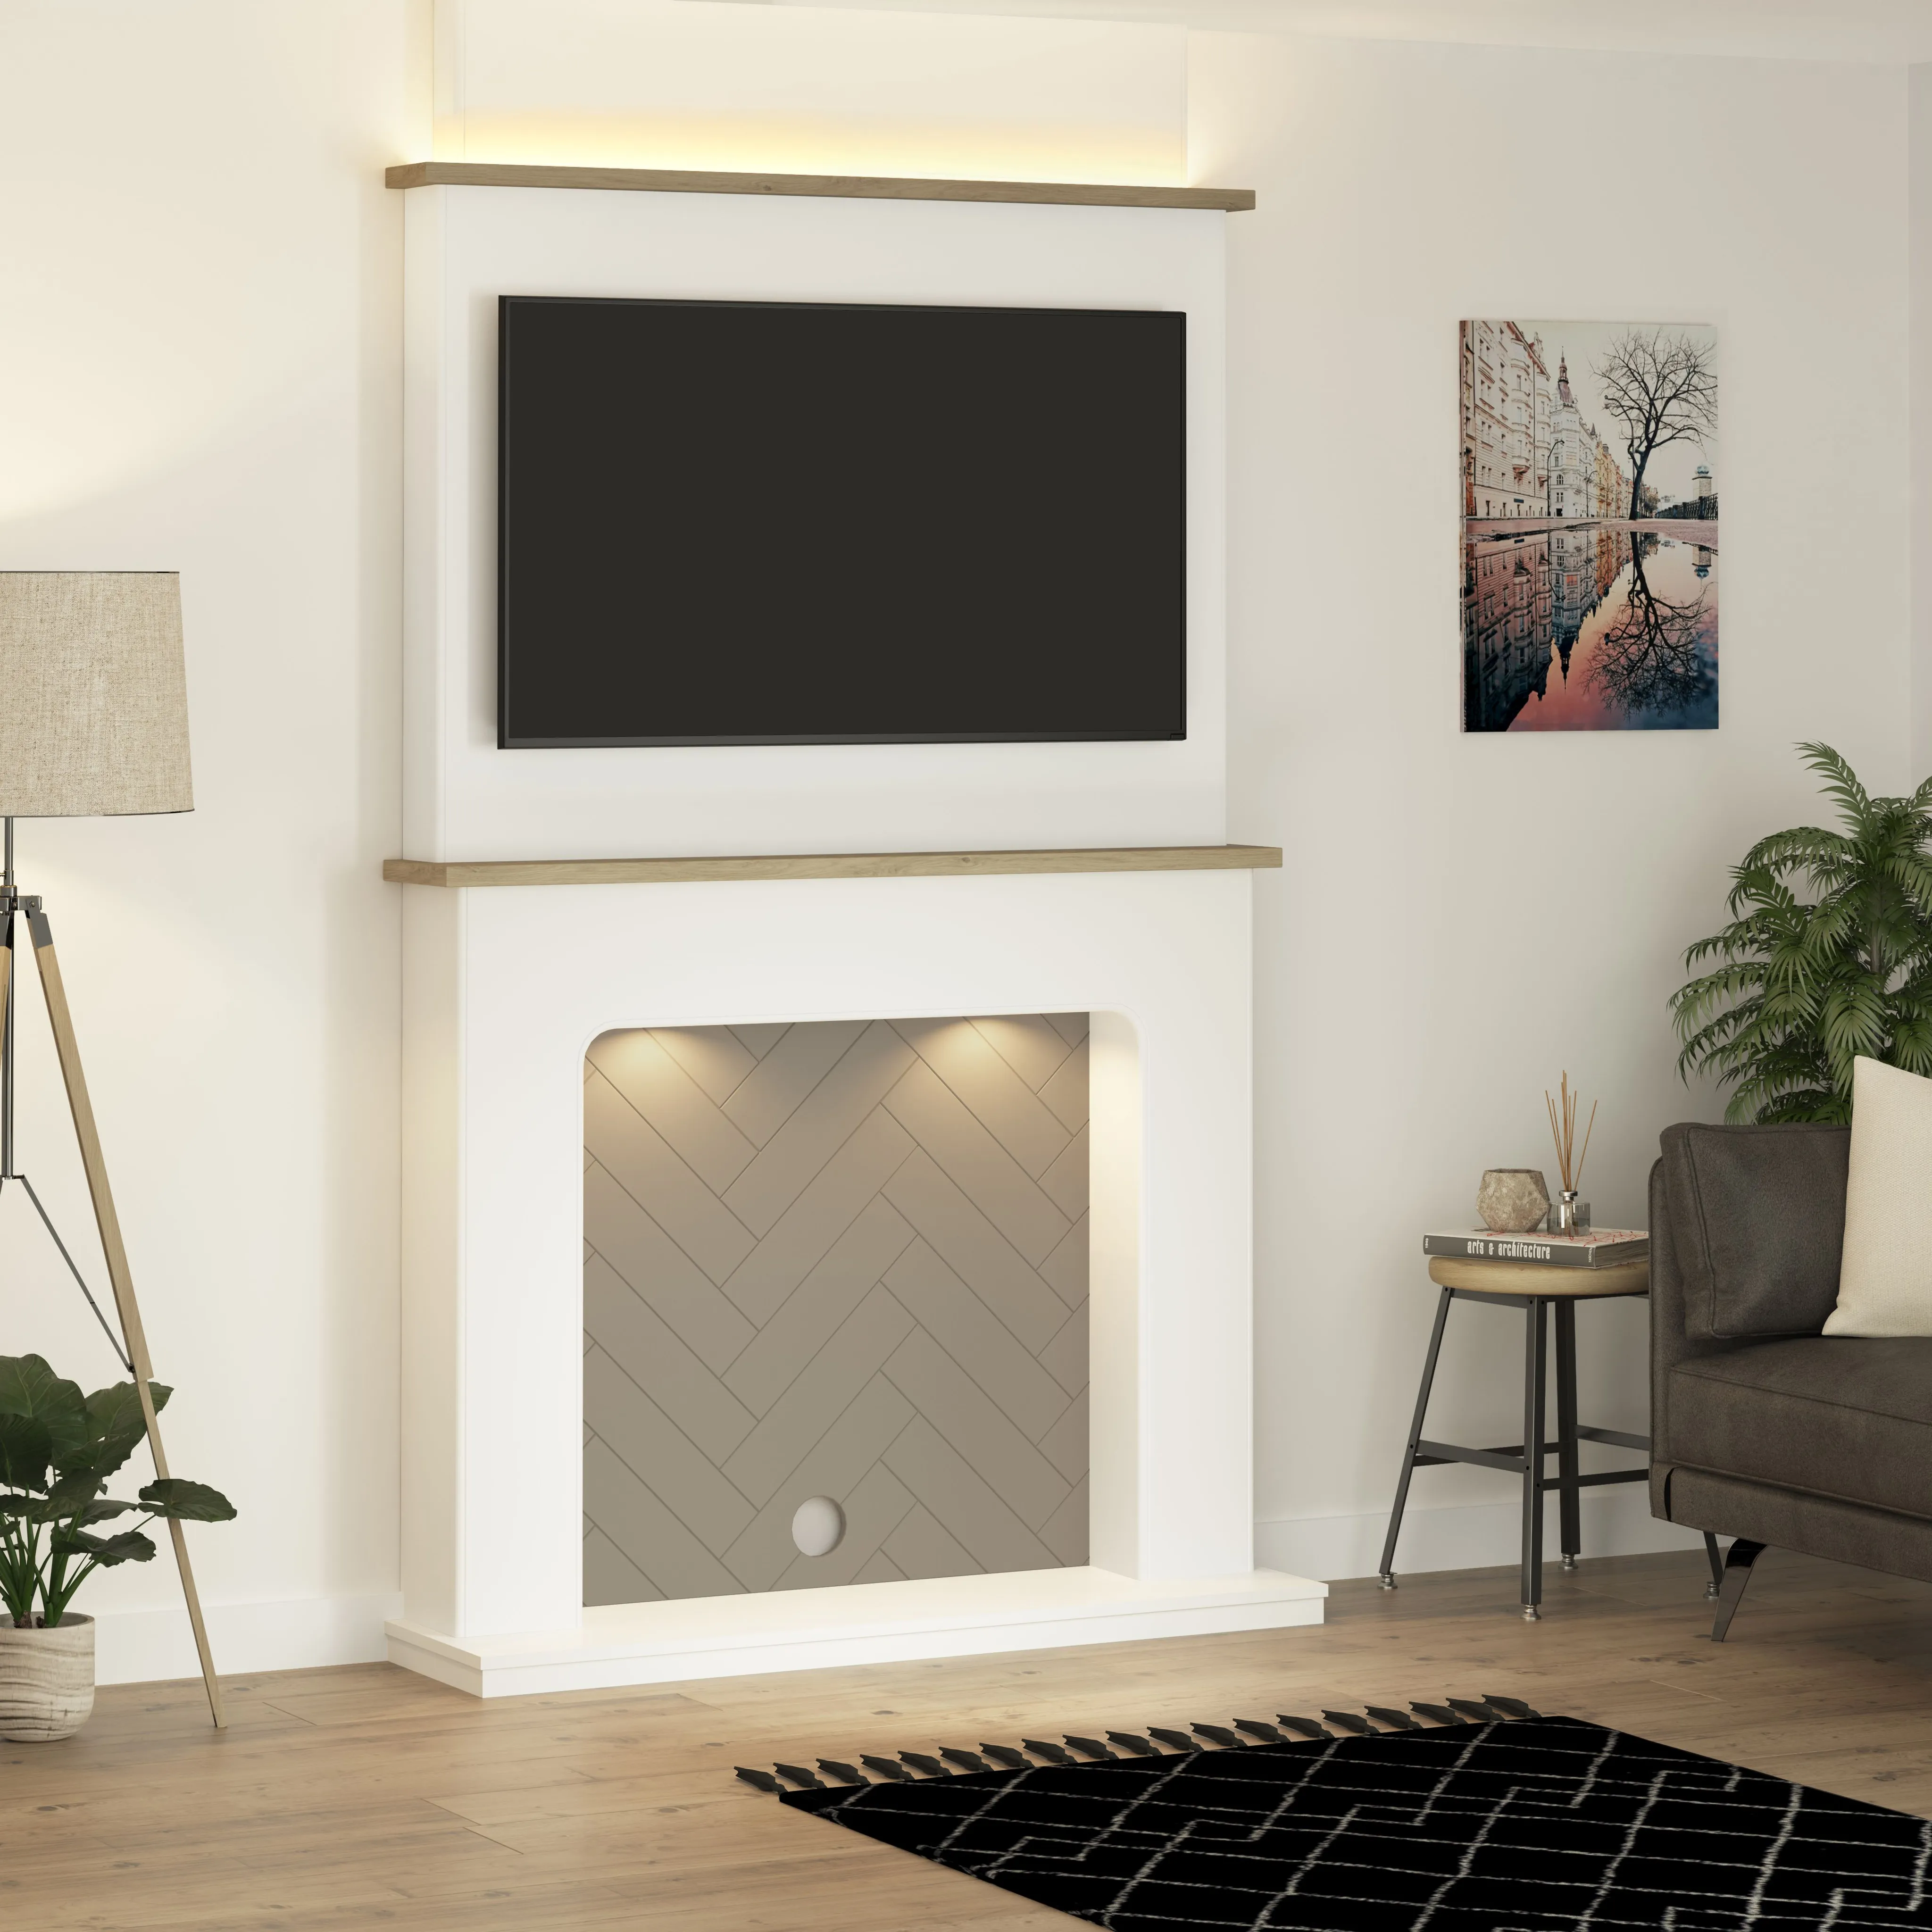 Be Modern Charingworth White & oak effect Fire surround with lights